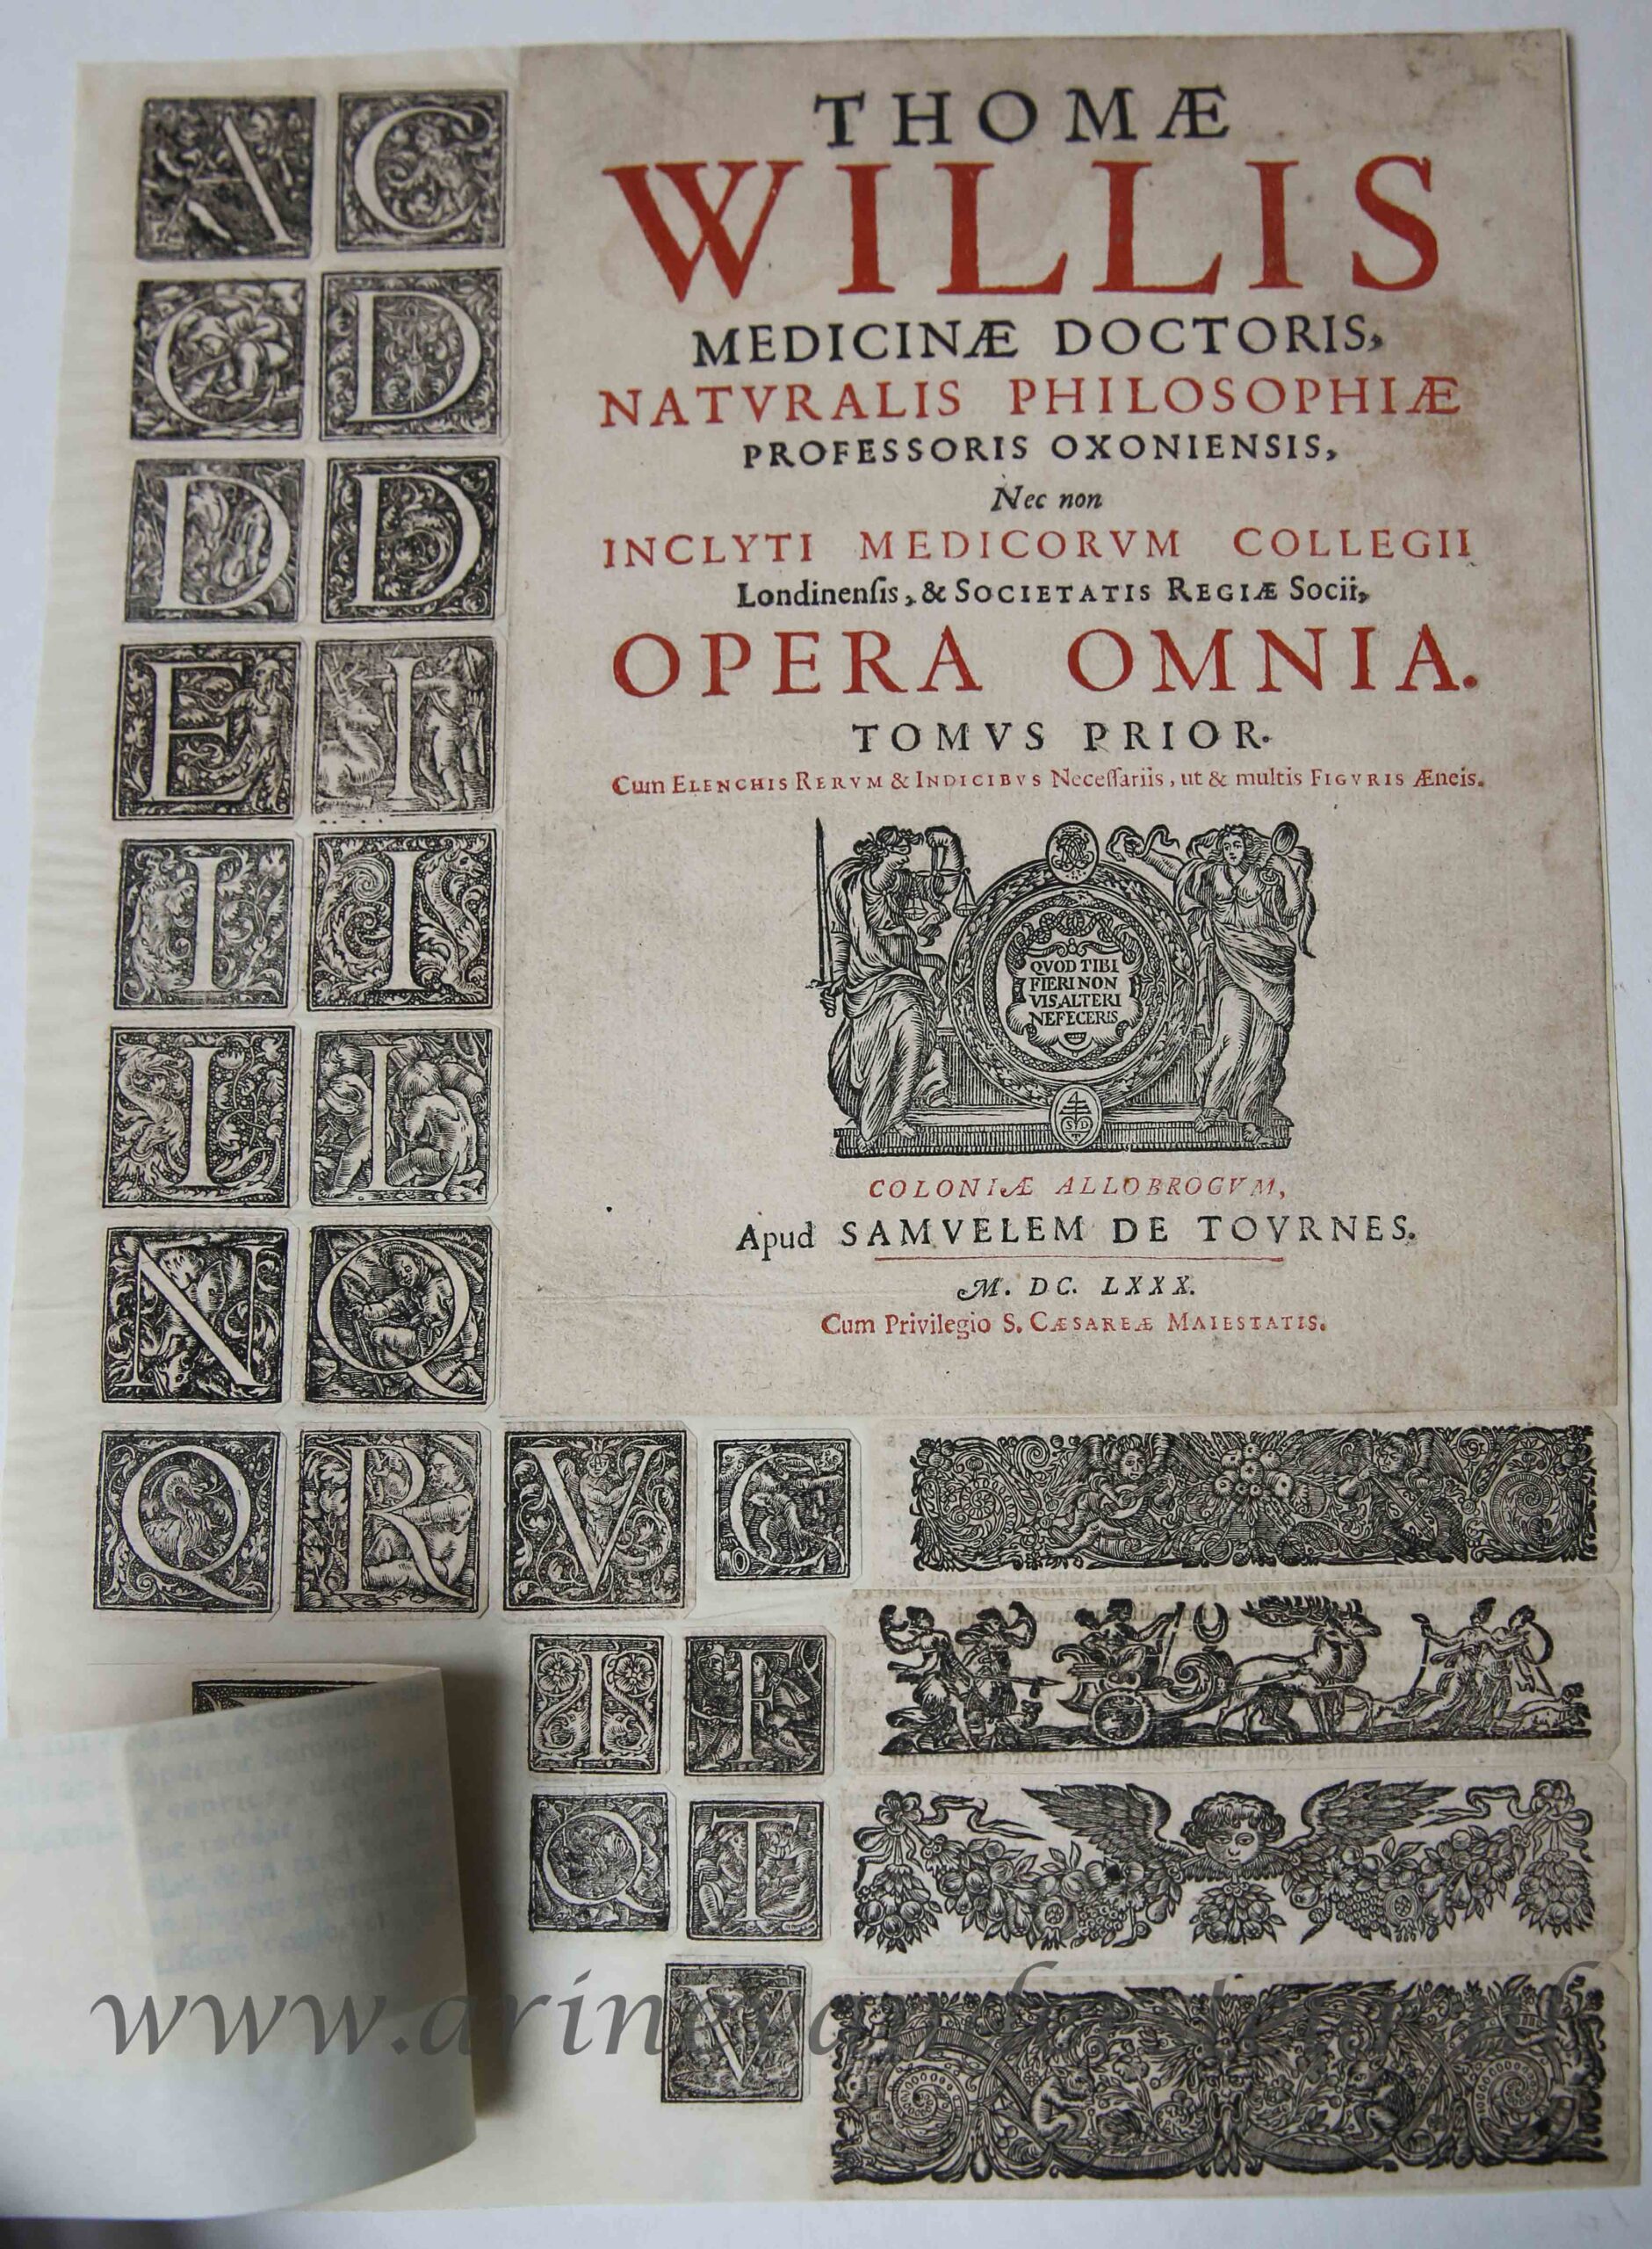 [Antique title page, page decorations, 1680] Opera Omnia of Thomas Willis, vol. I, published 1680, 1 p.